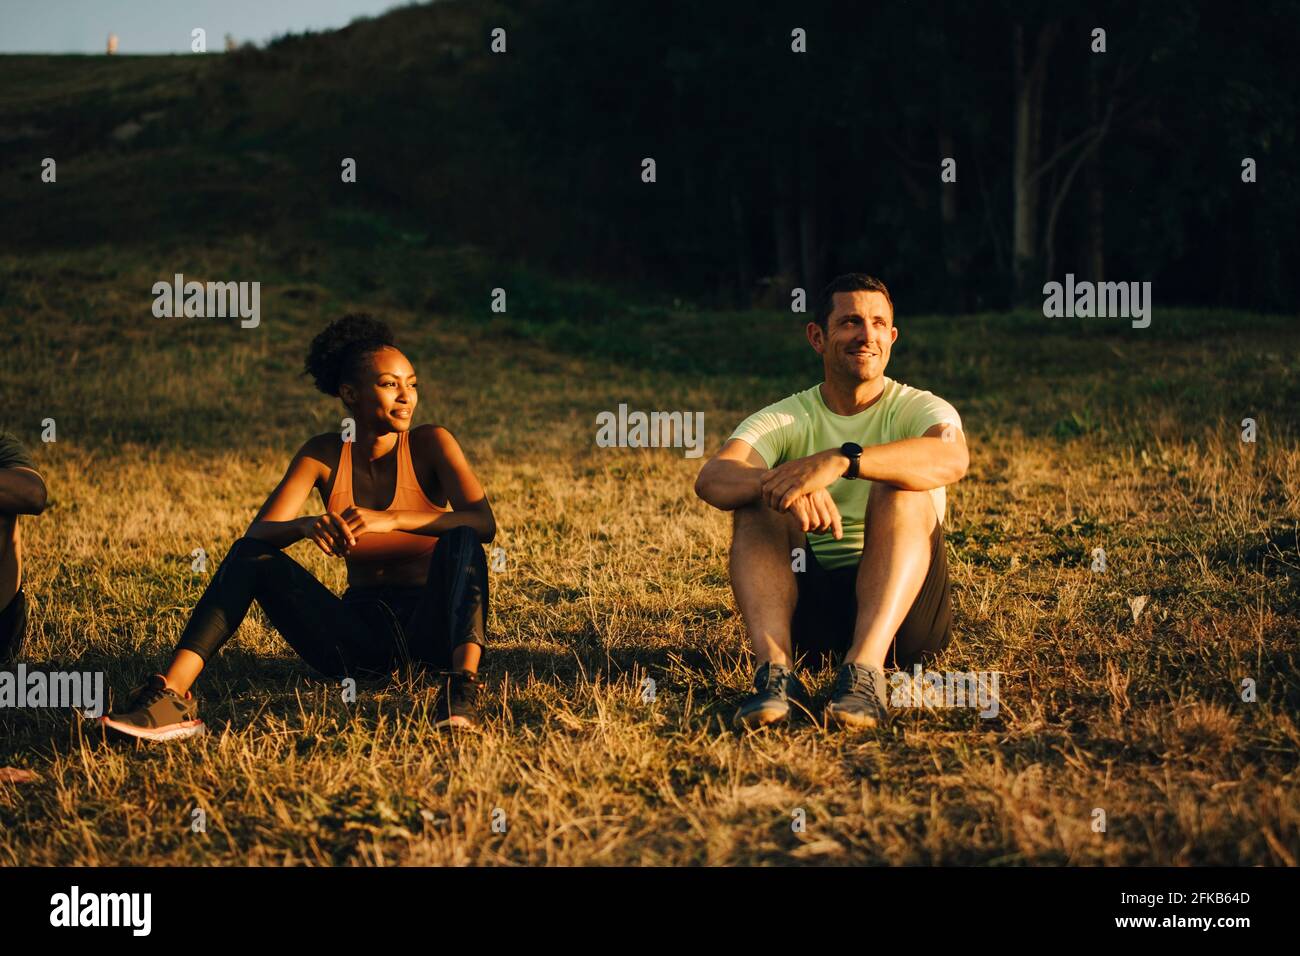 Male and female athletes looking away while sitting on grass during sunset Stock Photo